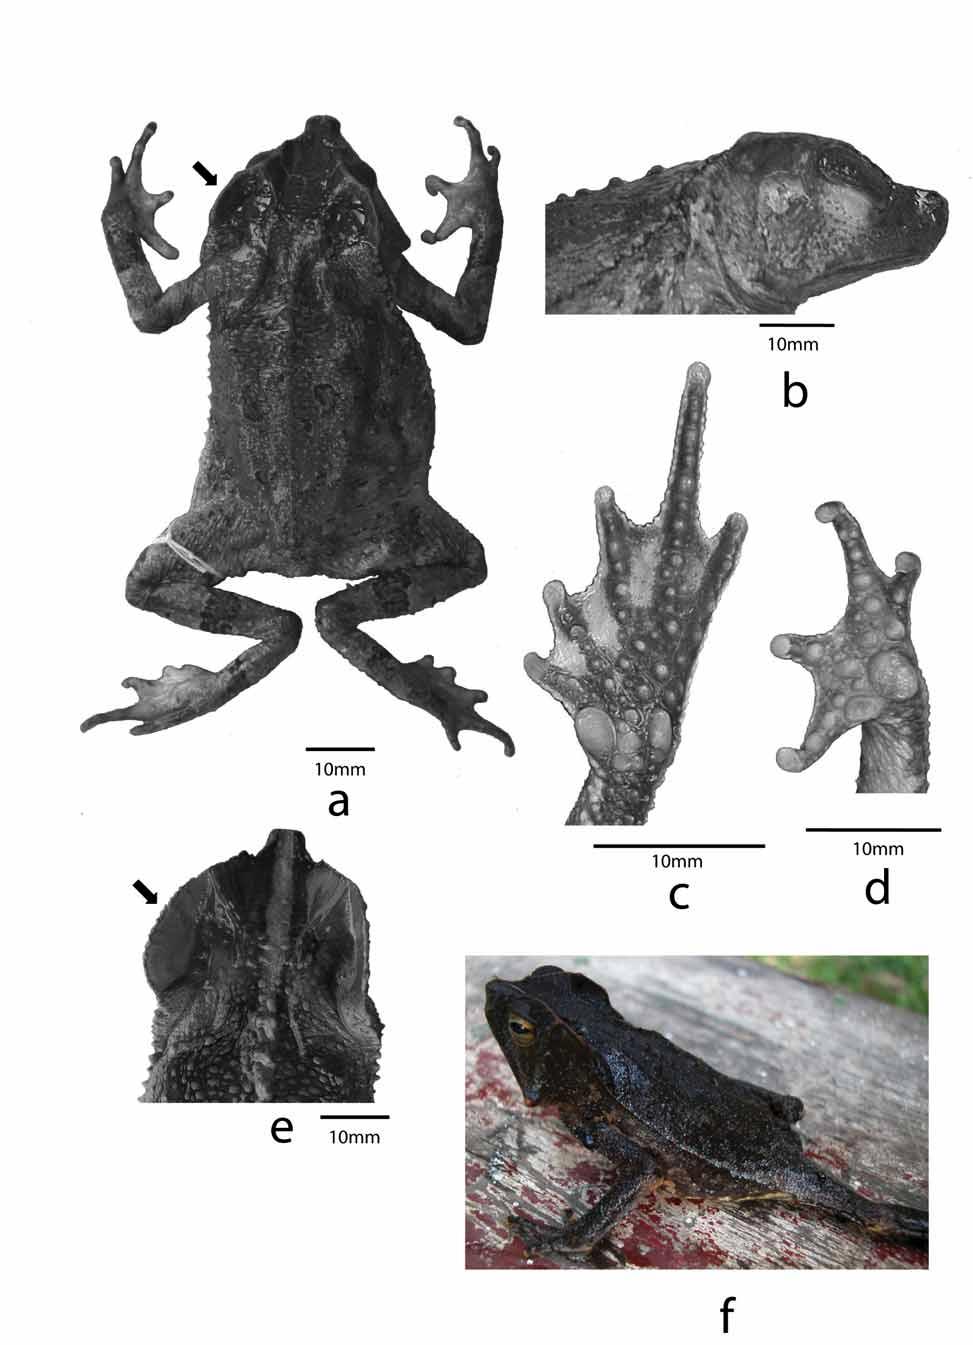 FIGURE 3 A-F: Holotype of R. martyi (MNHN 2006.2601): a. dorsal view, b. profile of head, c. ventral view of left foot, d.